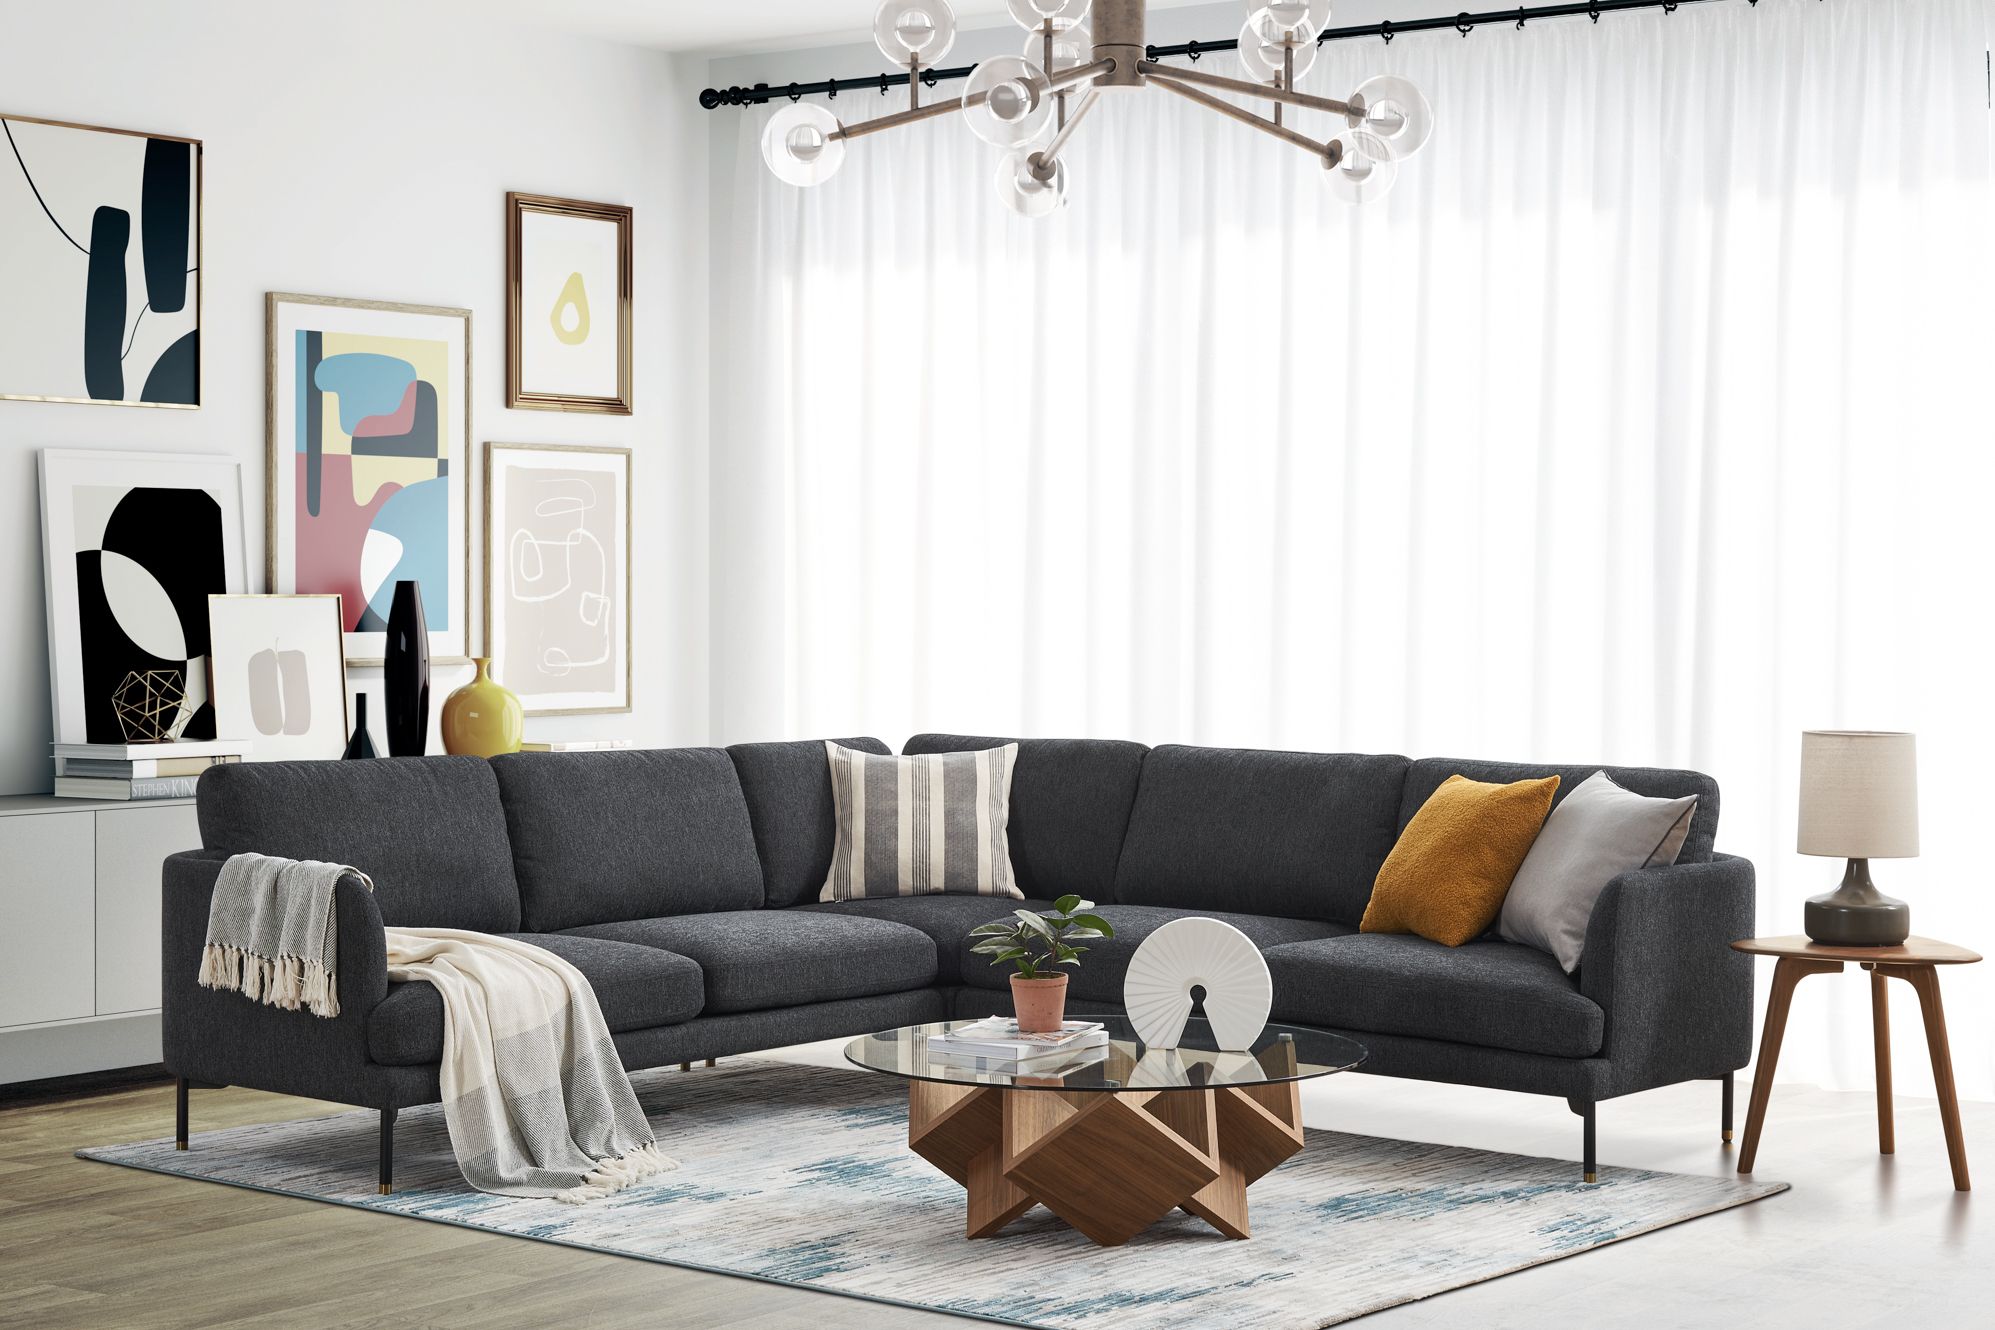 L Shape Sofas For Small Living Rooms? | Castlery Singapore With Small L Shaped Sectional Sofas In Beige (Photo 7 of 15)